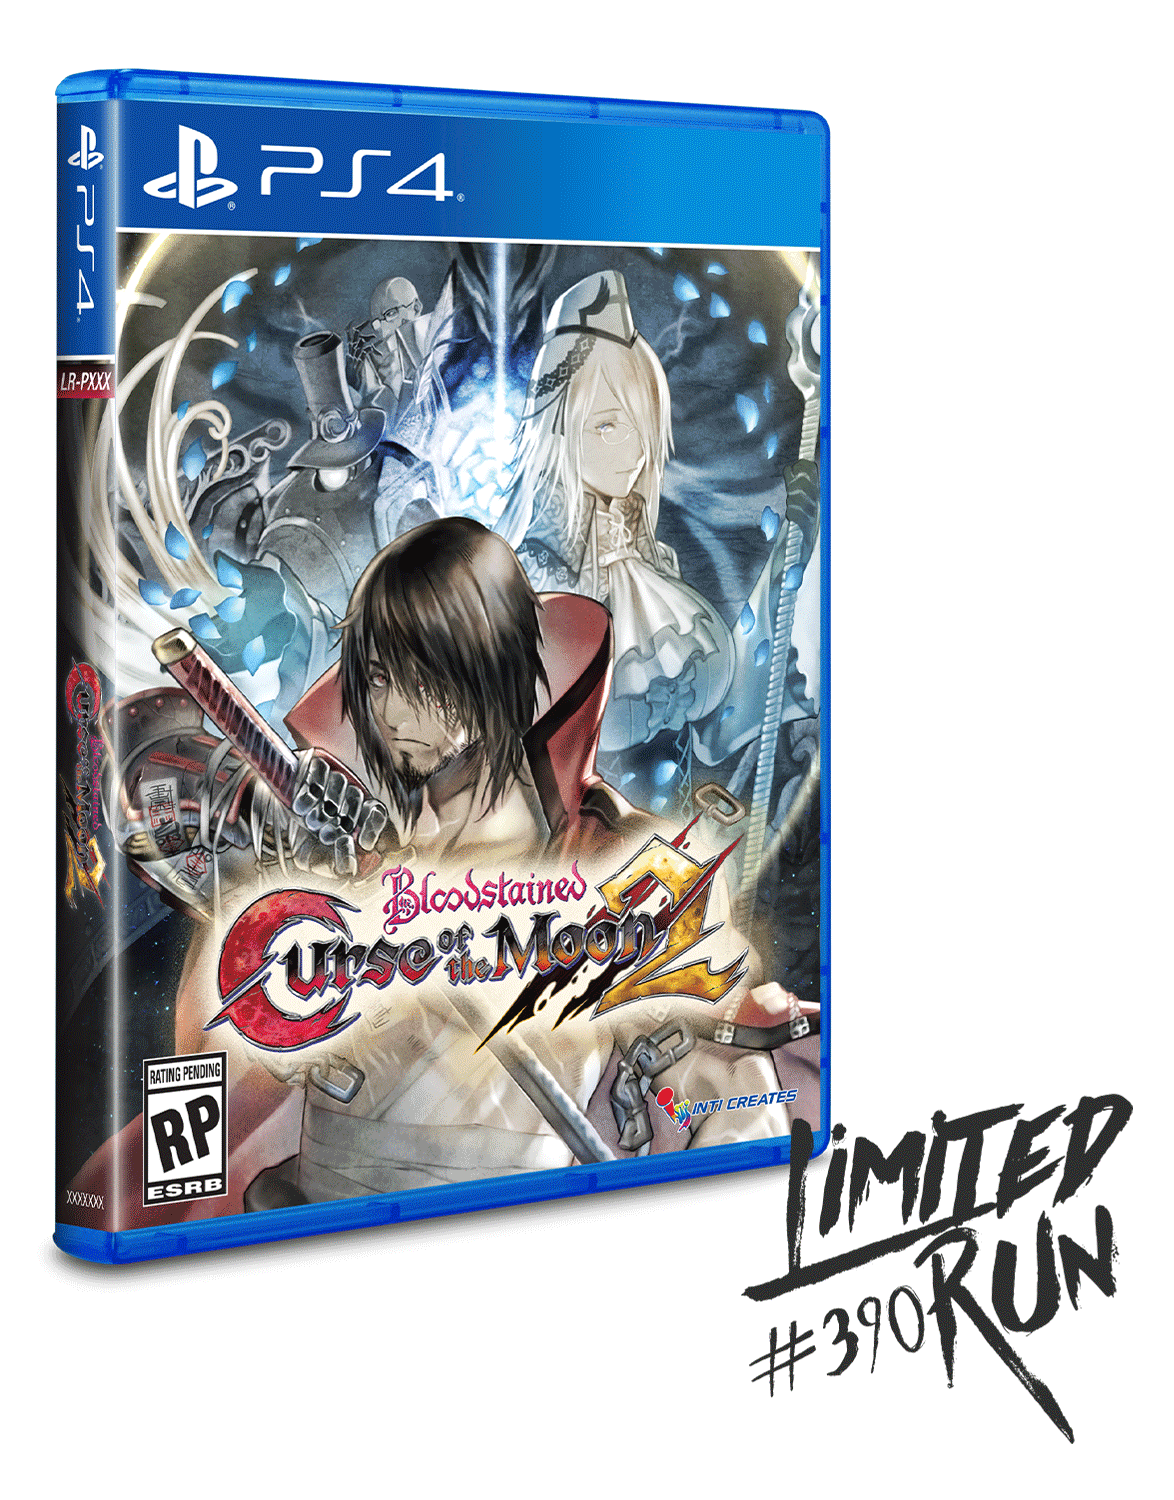 Луна 2 игра. Bloodstained - Curse of the Moon 2 PS 4. Bloodstained Curse of the Moon ps4. Bloodstained ps4 ,диск. Bloodstained Curse of the Moon PLAYSTATION.